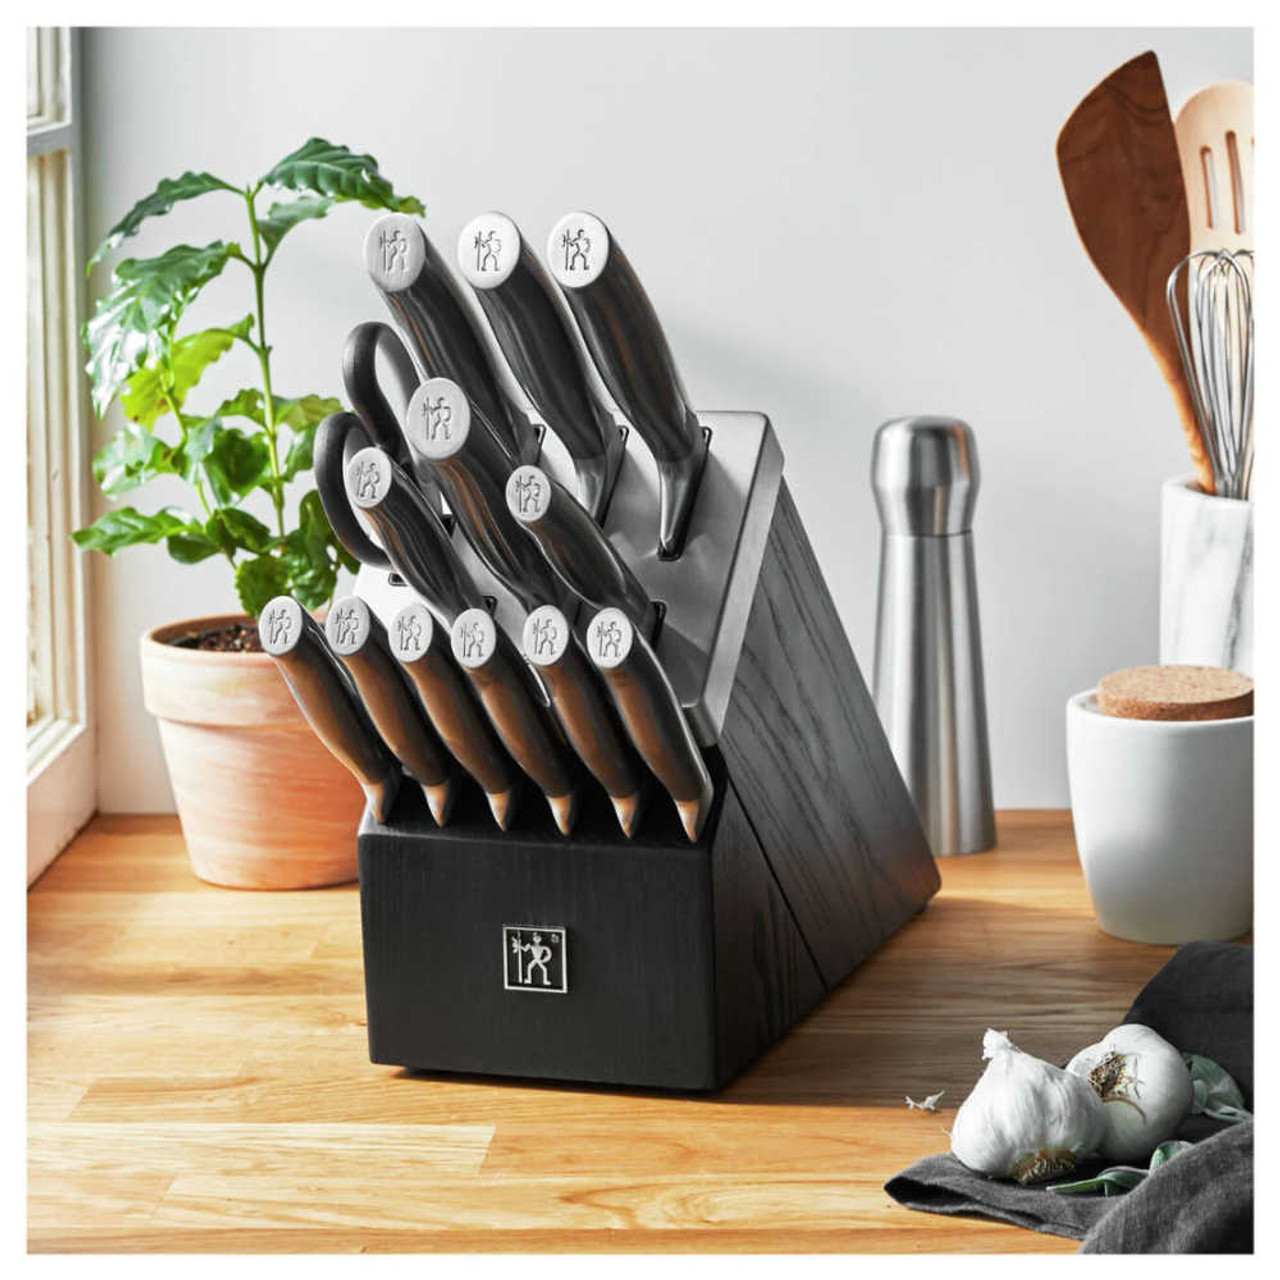  HENCKELS Definition 7-Piece Self-Sharpening Razor-Sharp Knife  Block Set for Paring, Santoku, Utility, Chefs, Carving, Kitchen Shears,  German Engineered Informed by 100+ Years of Mastery, Black: Home & Kitchen